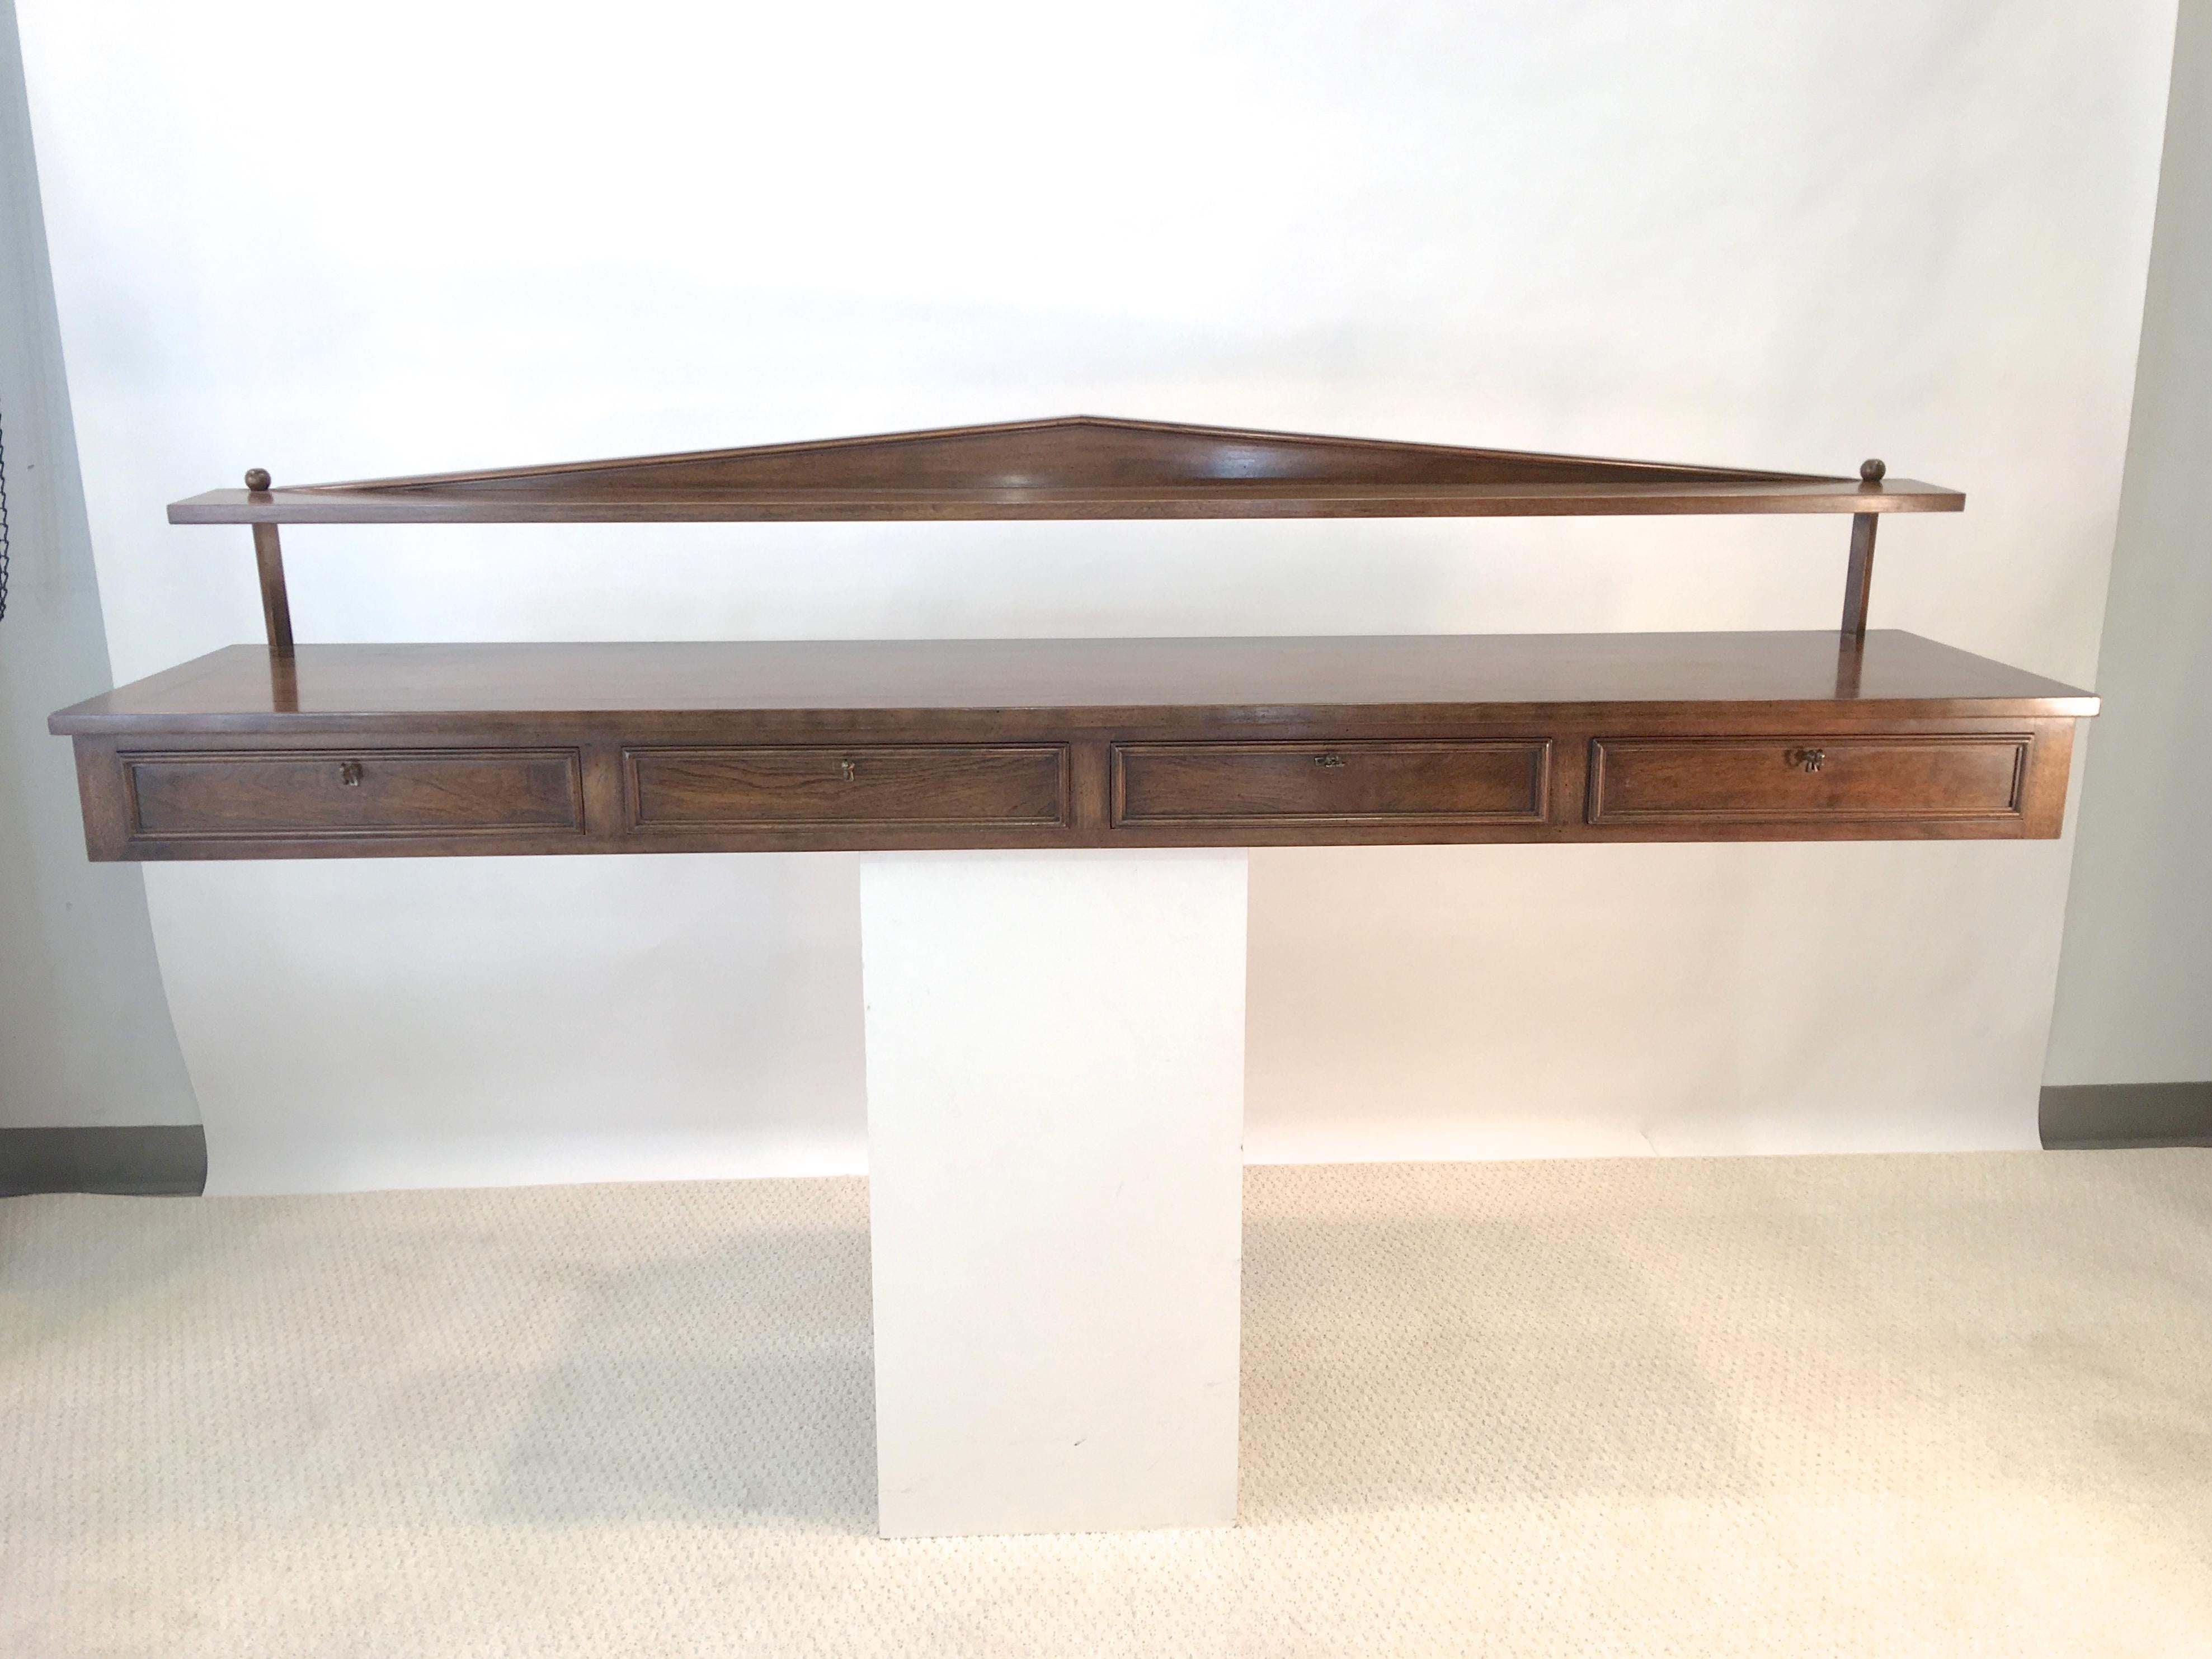 Gracious and at once both neoclassical and modern, this wall-mounted buffet console was designed by the late Ronnie Brahms and produced by the family owned furniture workshop of H. Sacks and Sons of Brookline, MA in the 1960s. Label inside first of